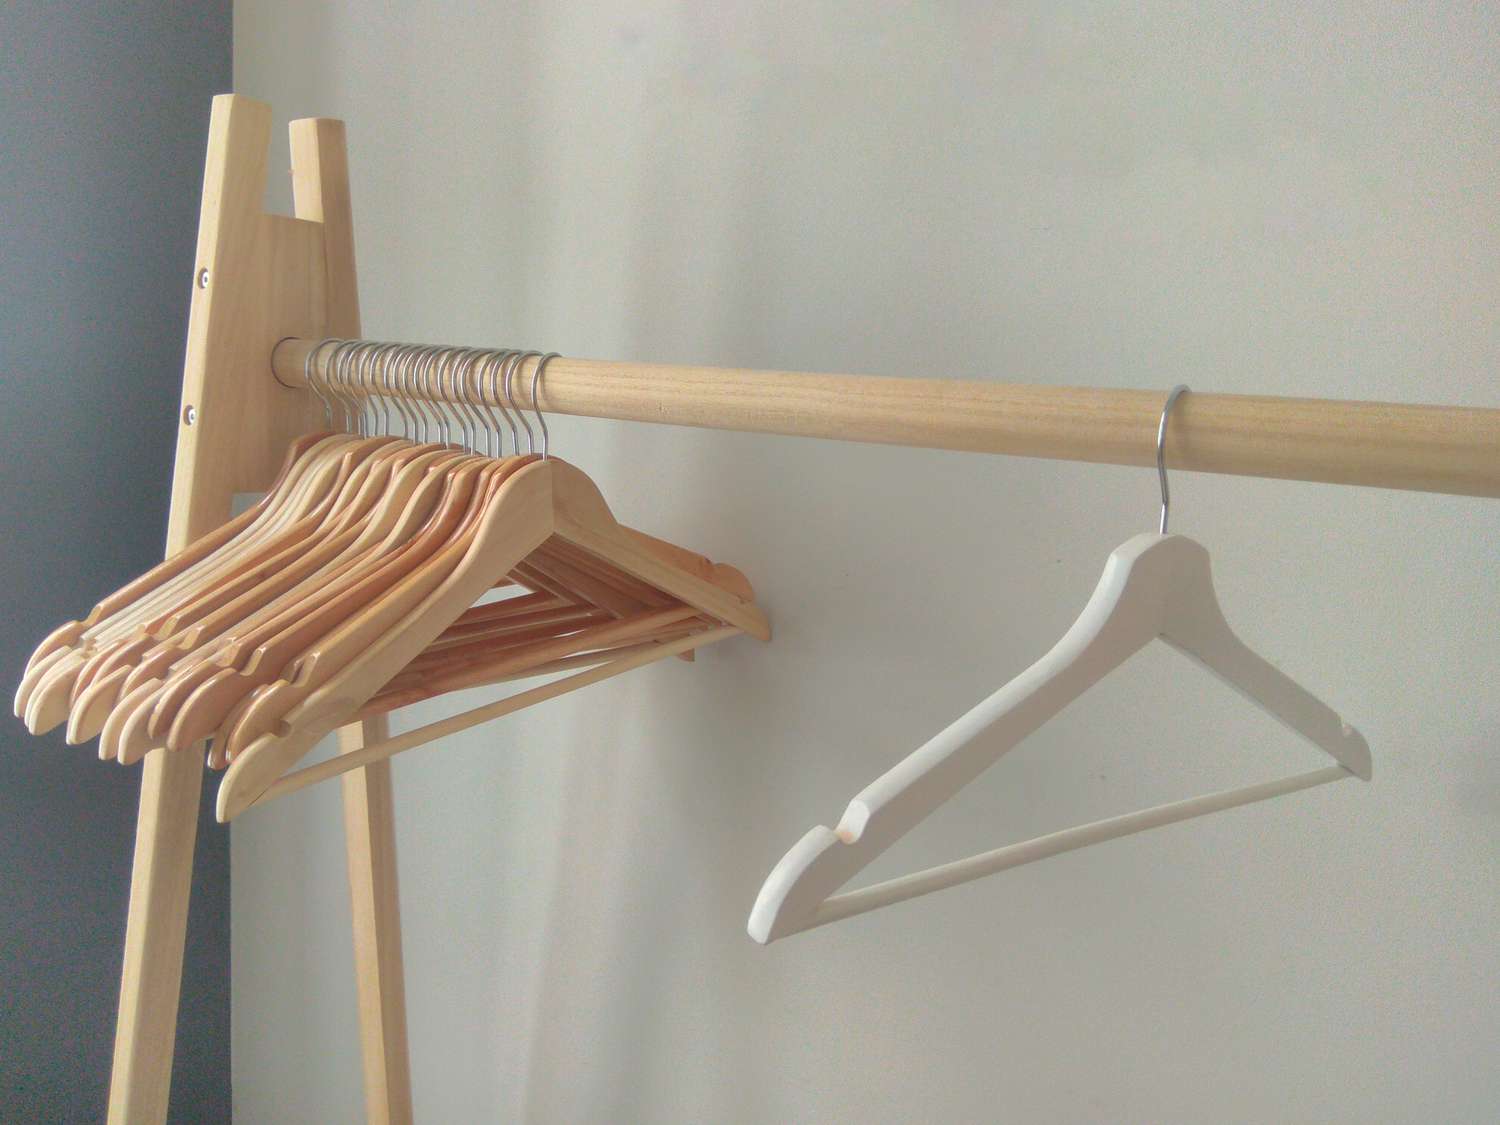 How To Store Hangers When Moving